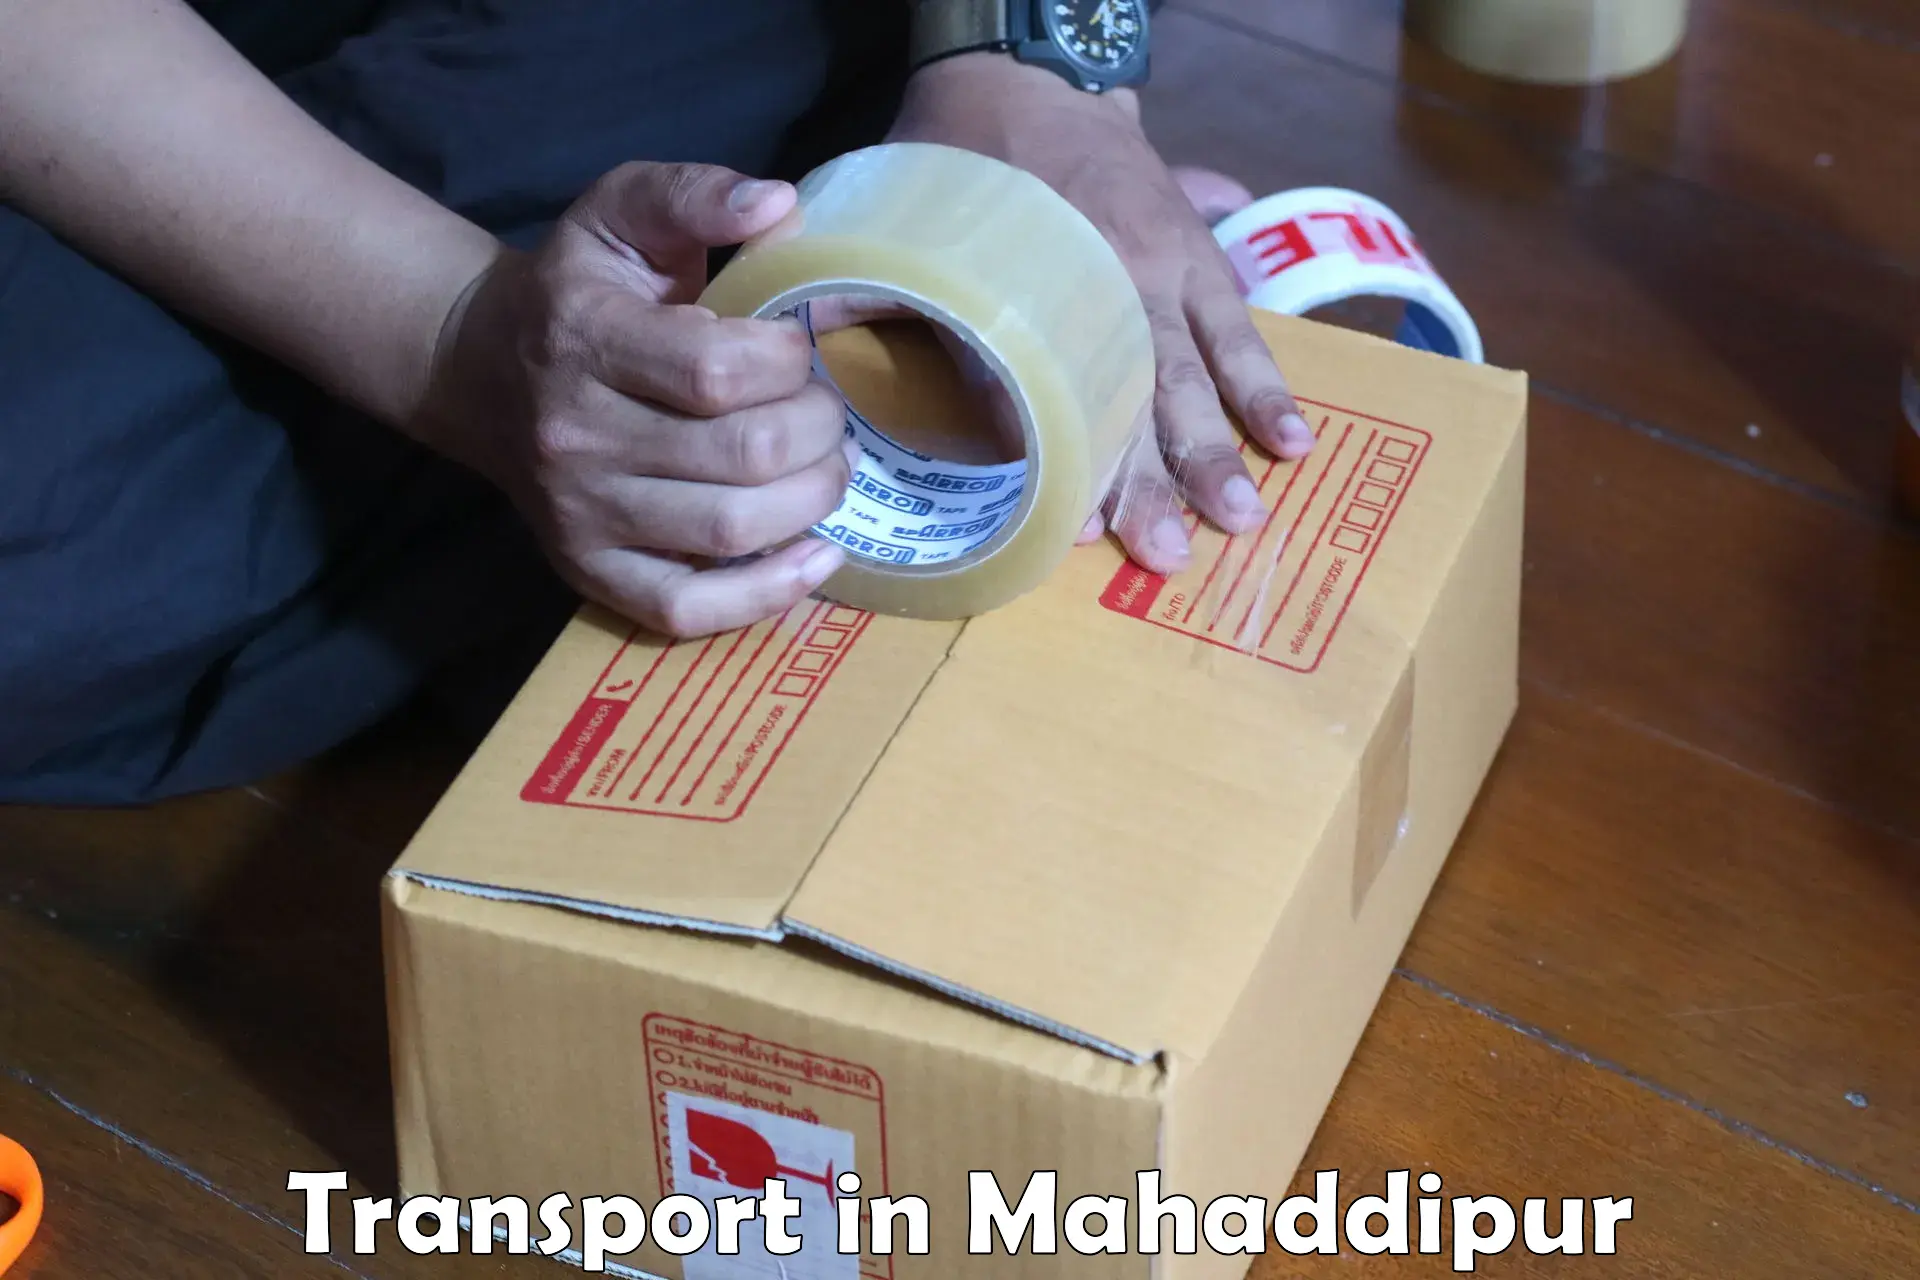 Vehicle courier services in Mahaddipur